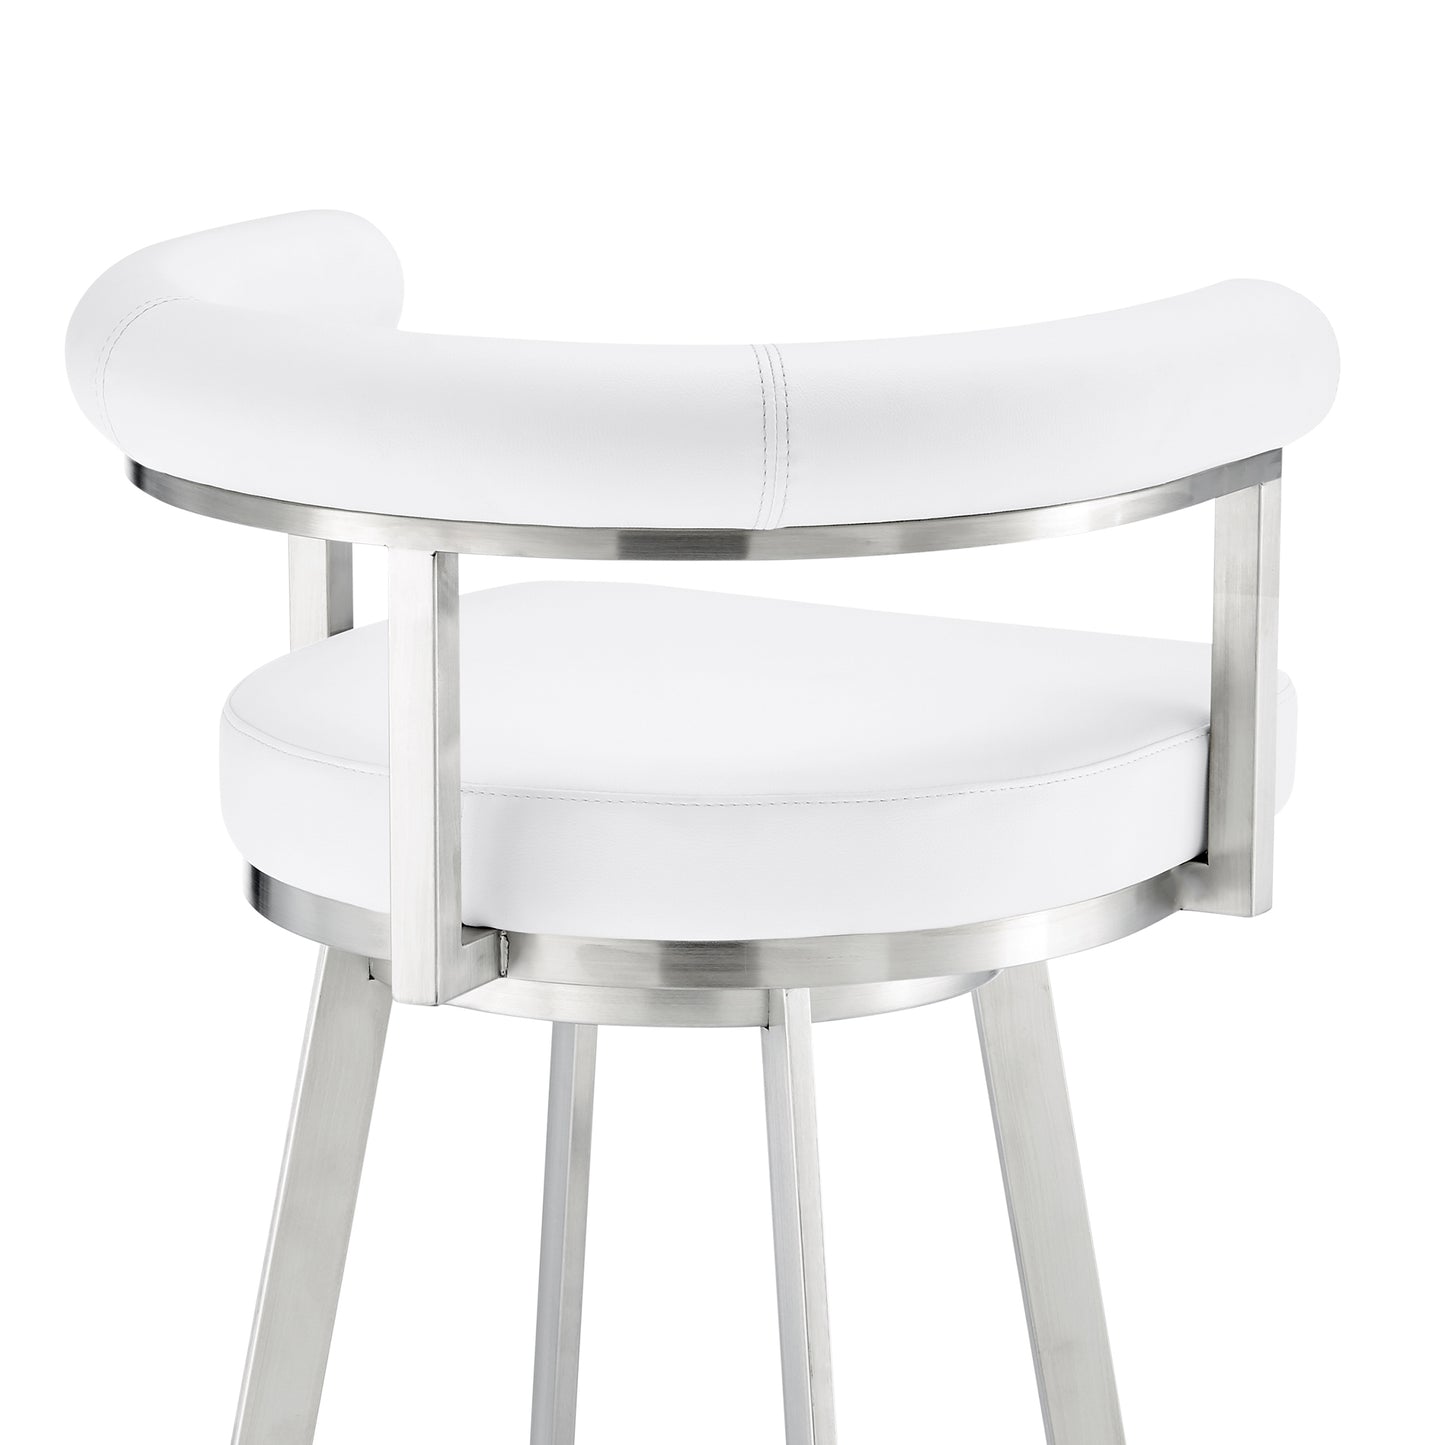 Magnolia 30" Swivel Bar Stool in Brushed Stainless Steel with White Faux Leather